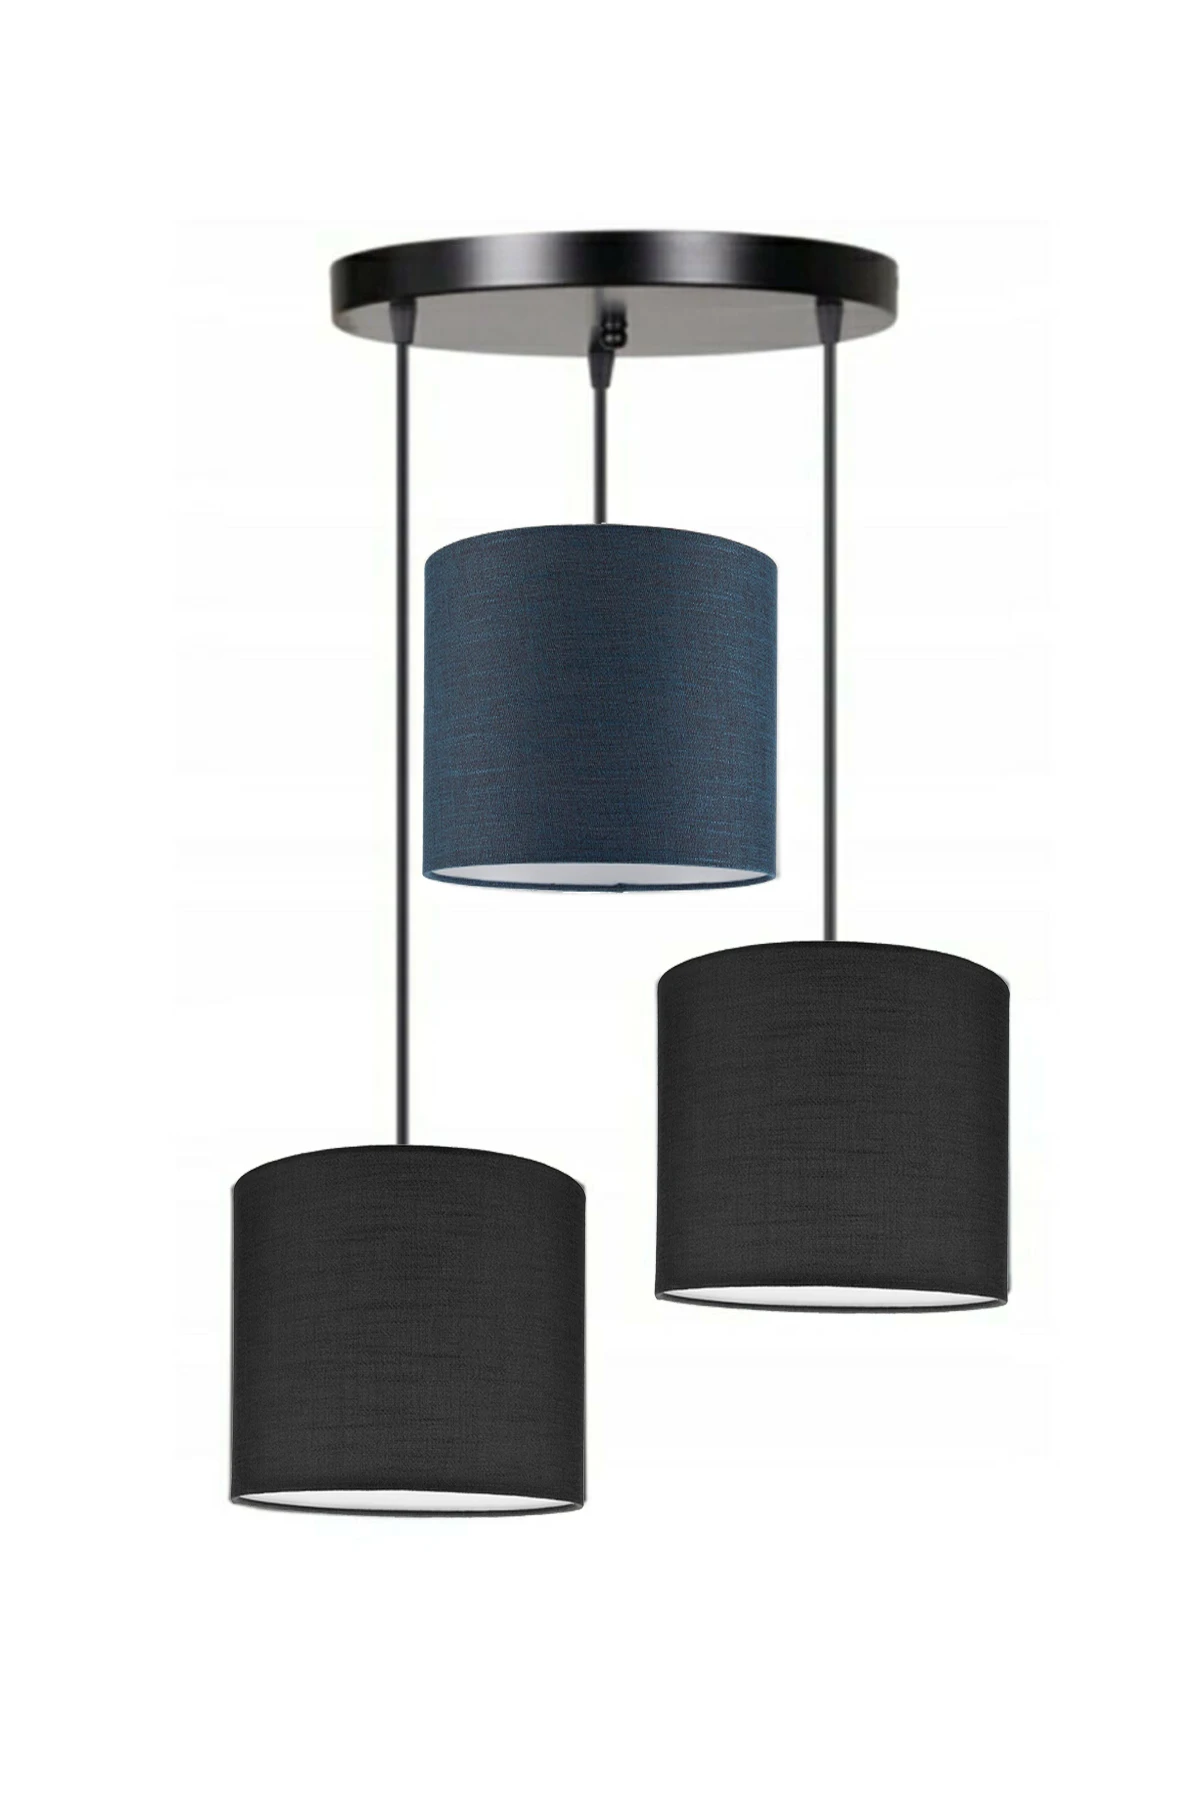 3 Heads 2 Black 1 Navy Blue Cylinder Fabric Lampshade Pendant Lamp Chandelier Modern Decorative Design For Home Hotel Office Use